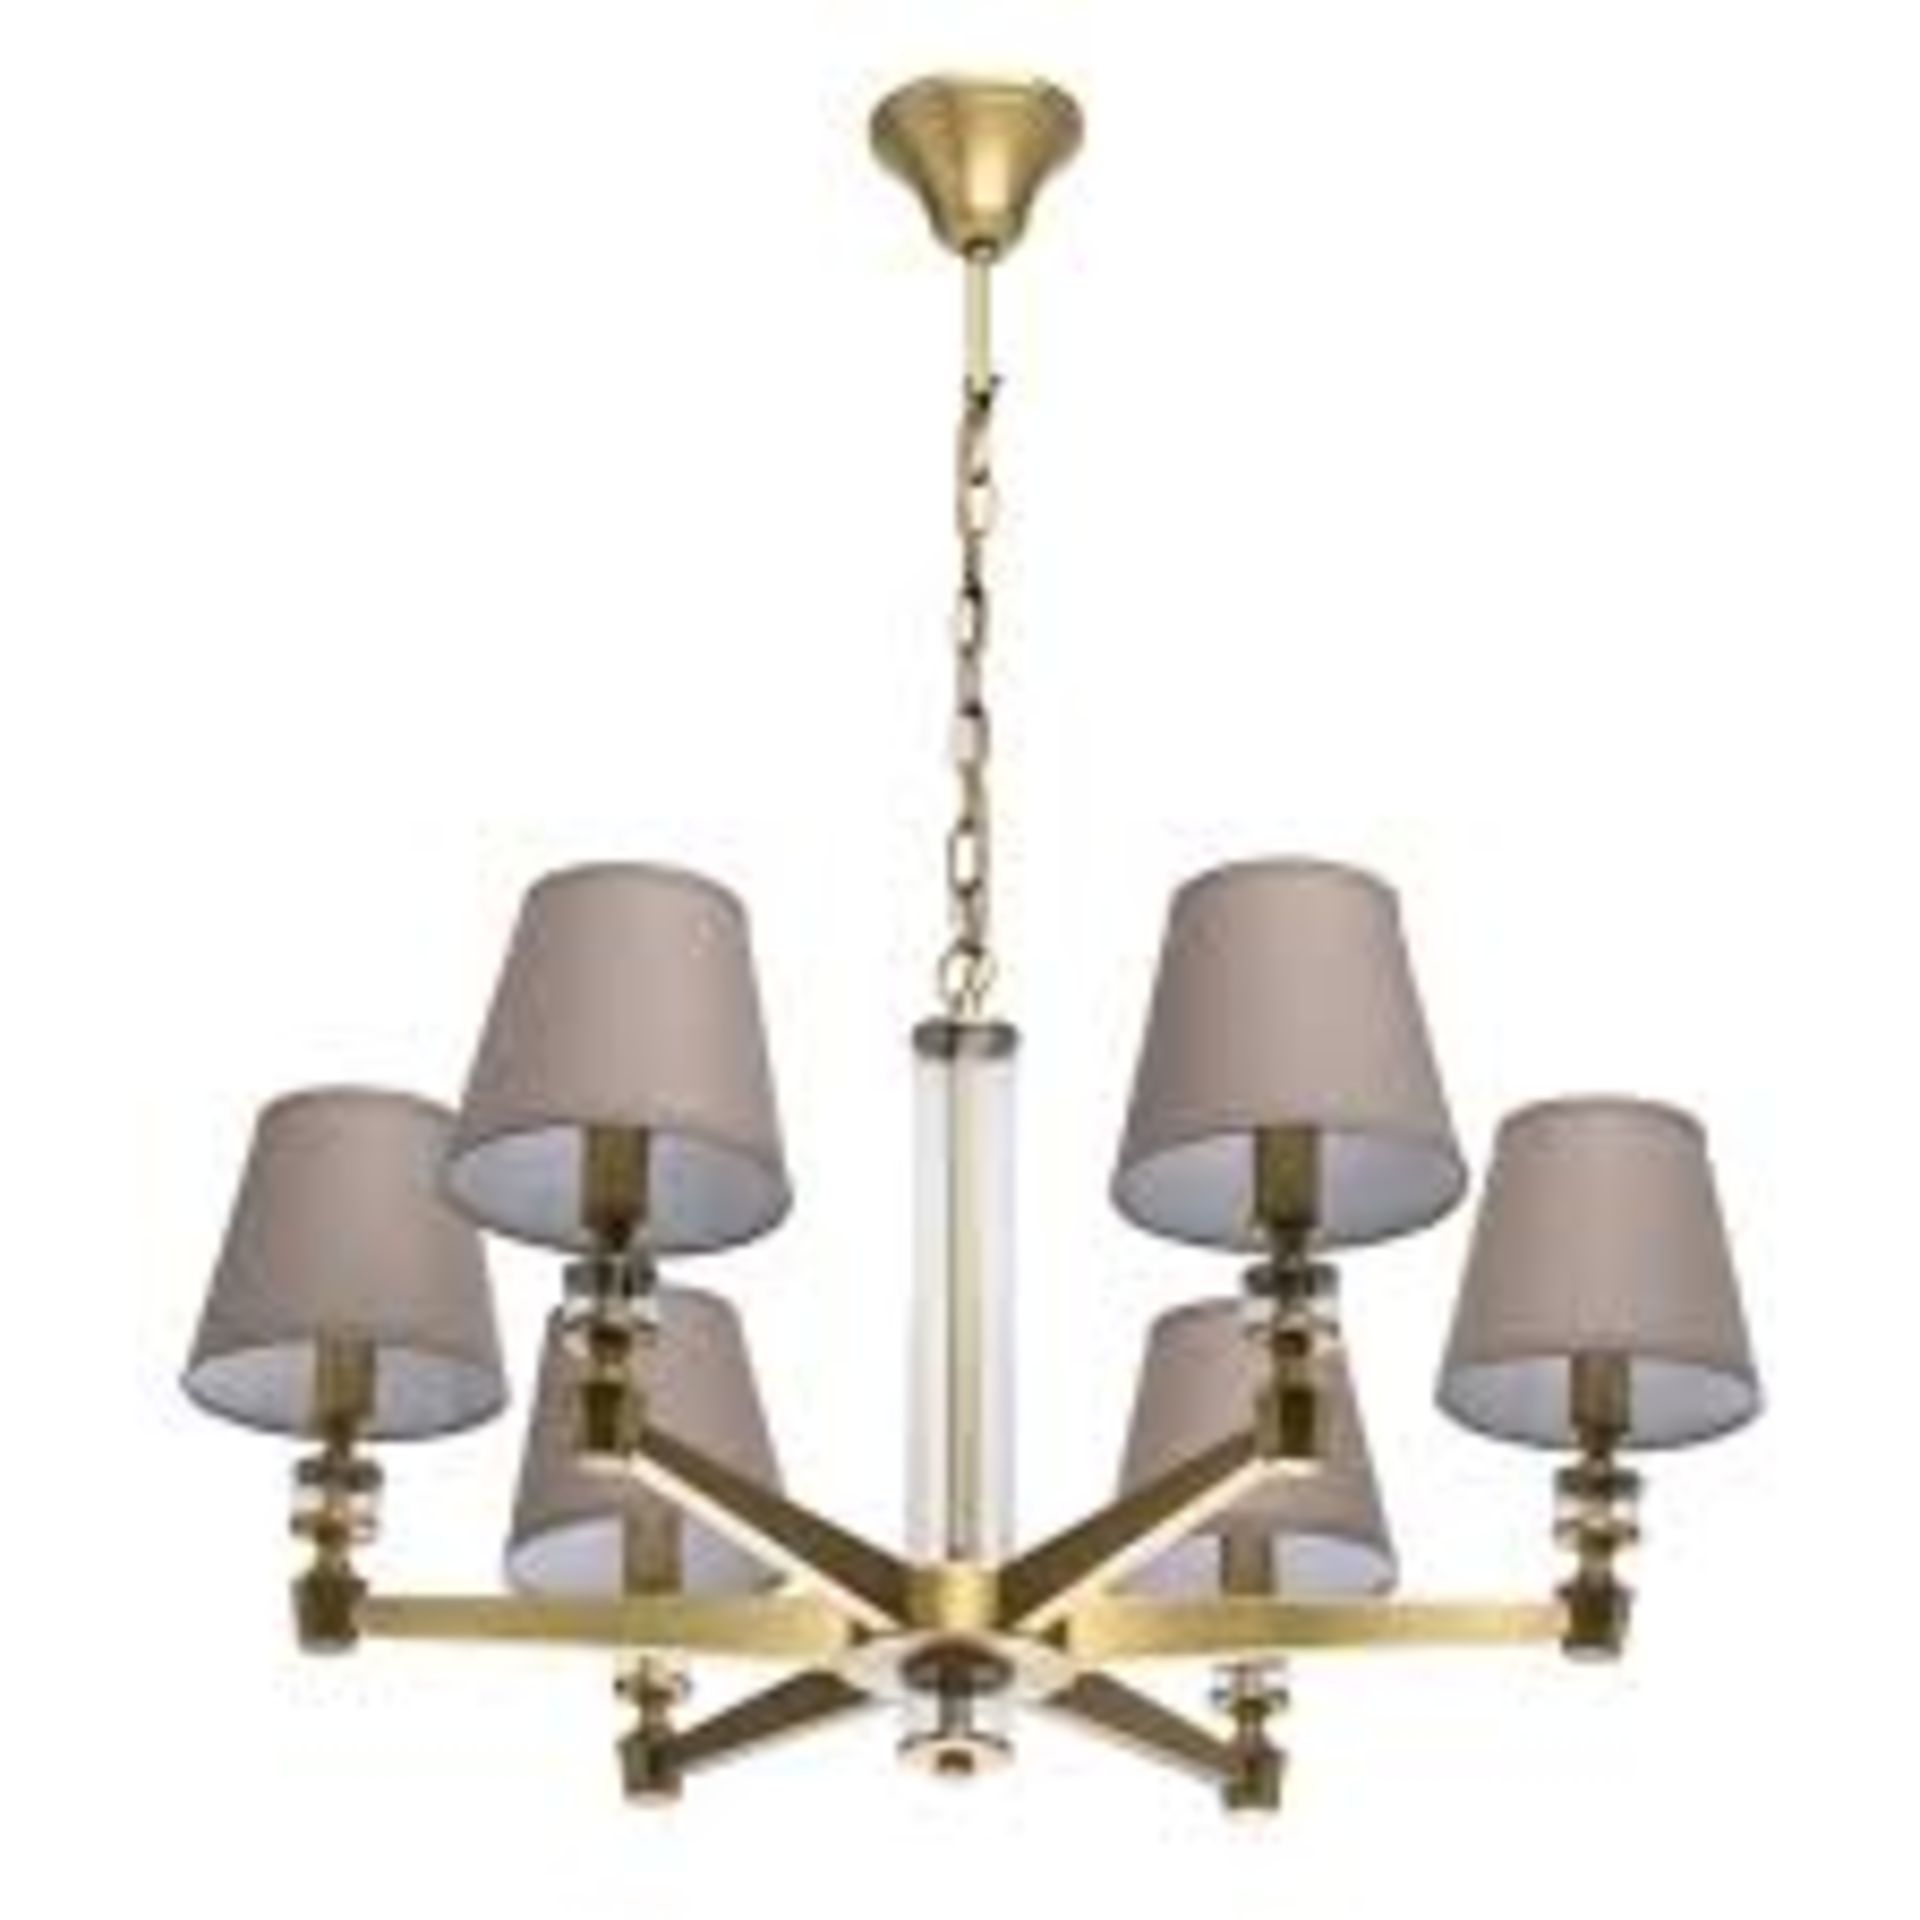 Boxed Willa Arlo Shaded Chandelier Style Ceiling Light RRP £280 (16543) (Pictures Are For